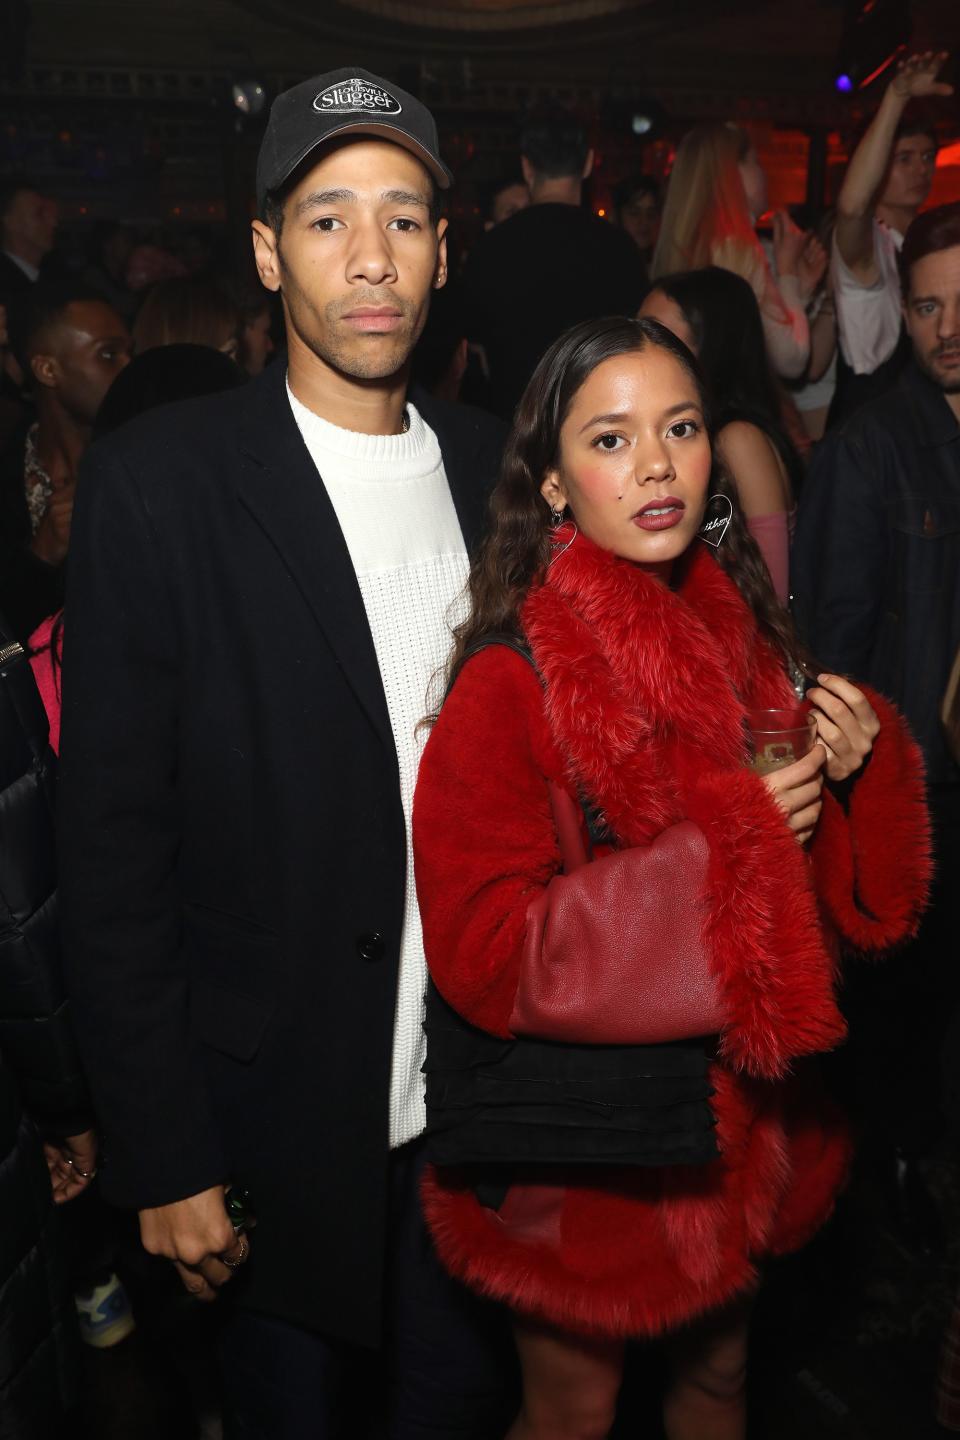 Lucien Clarke and Tara Lilly attend the adidas Originals Meets Fiorucci launch party in partnership with Dazed, at The Box Soho